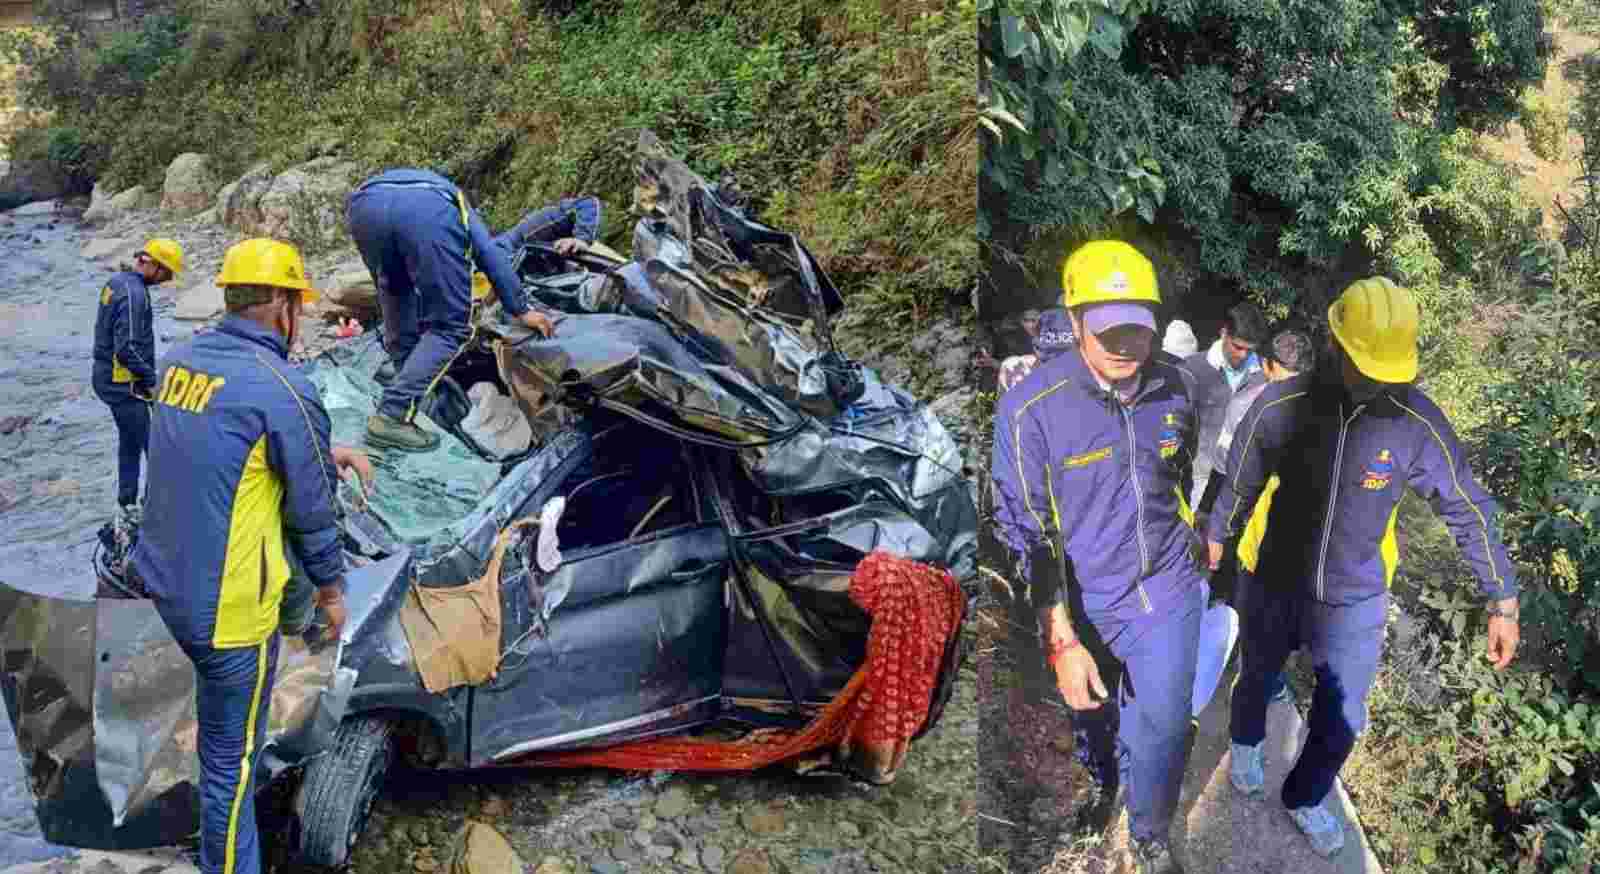 Uttarakhand news: Four including groom's father, sister died in Almora marriage car accident. Almora marriage car accident